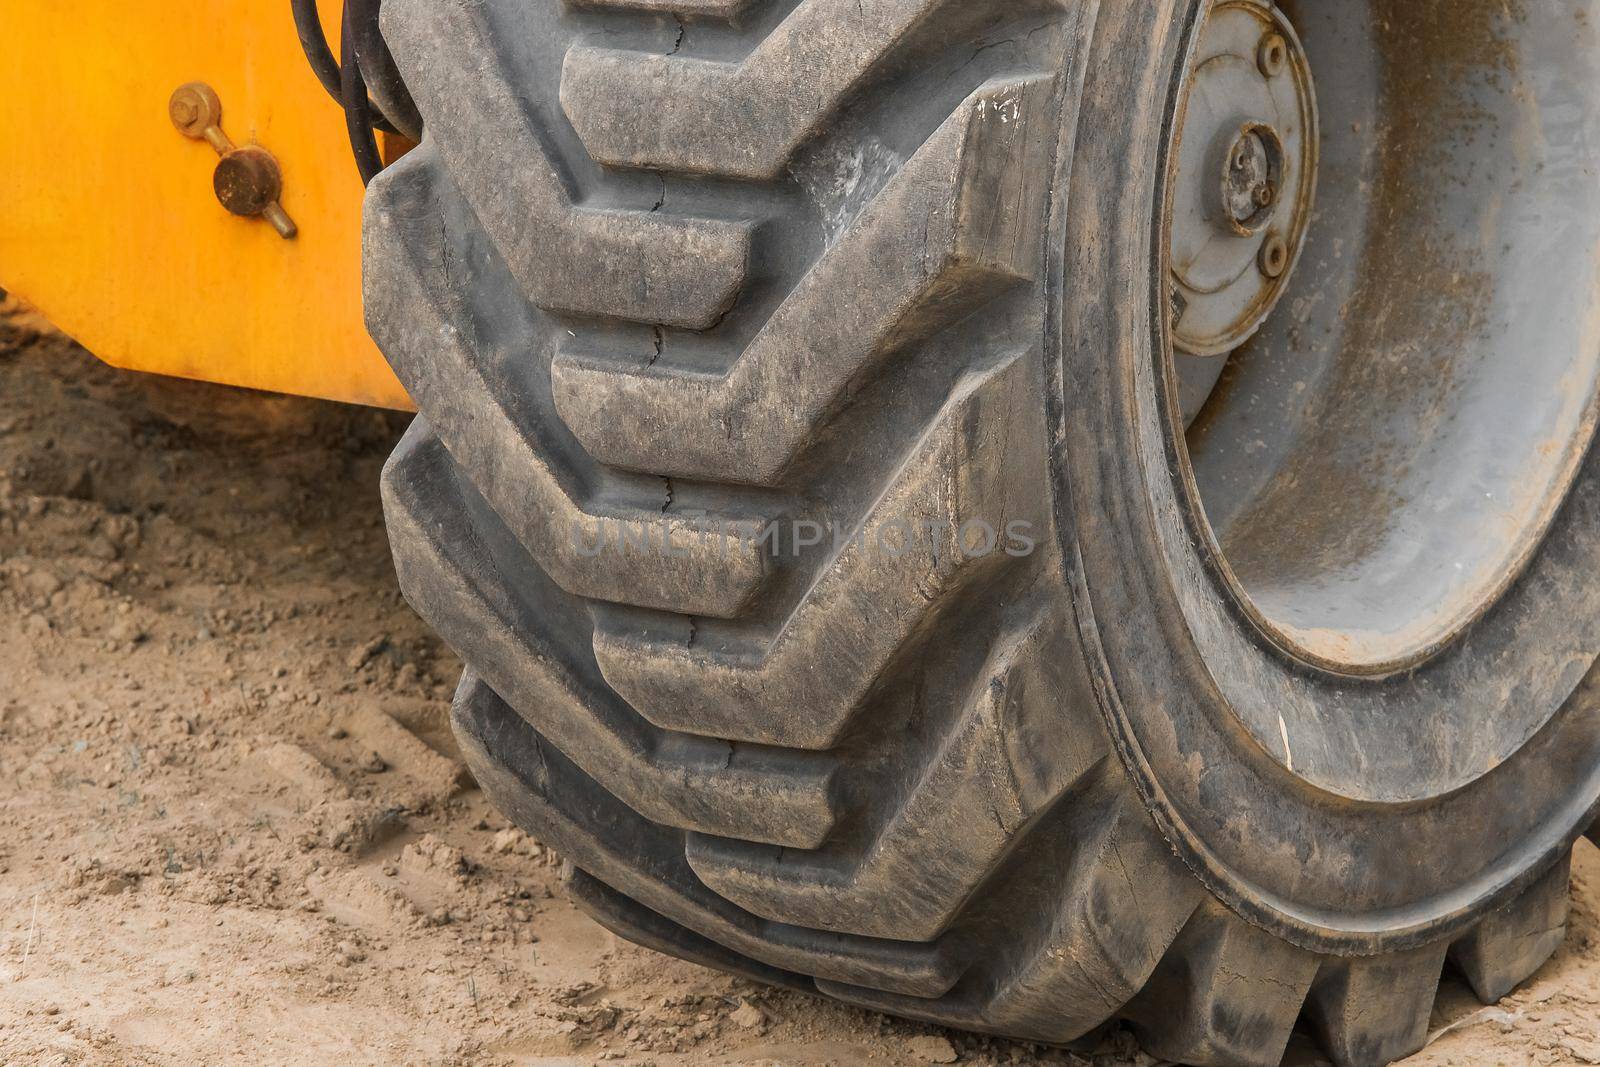 Wheels of industrial lifting transport tire truck against the background of sand at a construction site by AYDO8